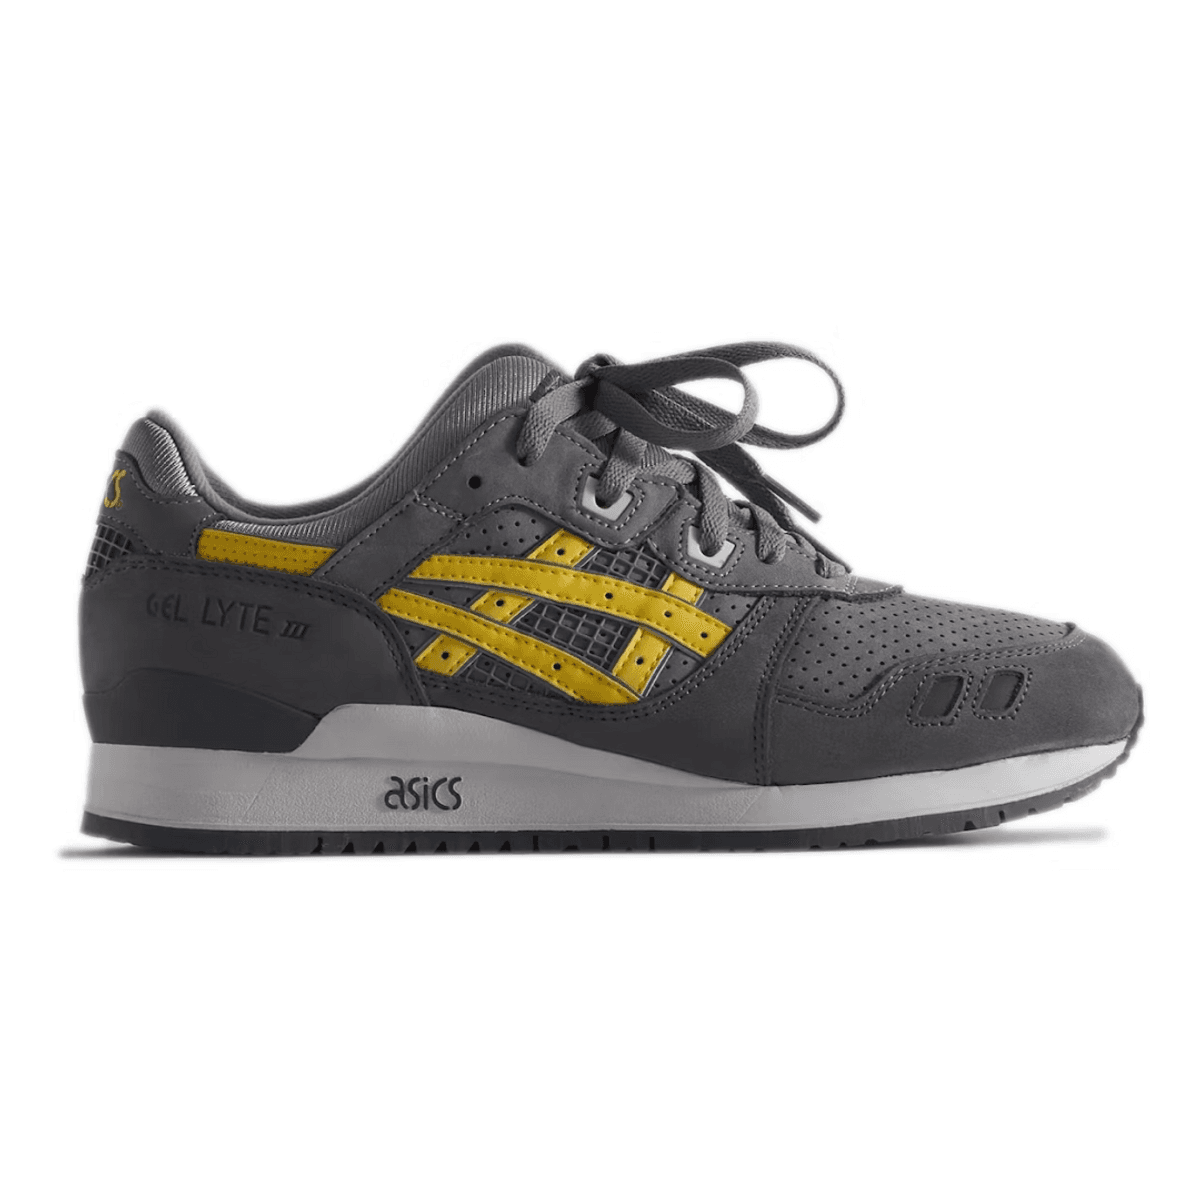 Ronnie Fieg for ASICS GEL-LYTE III Remastered - Super Yellow Release Info